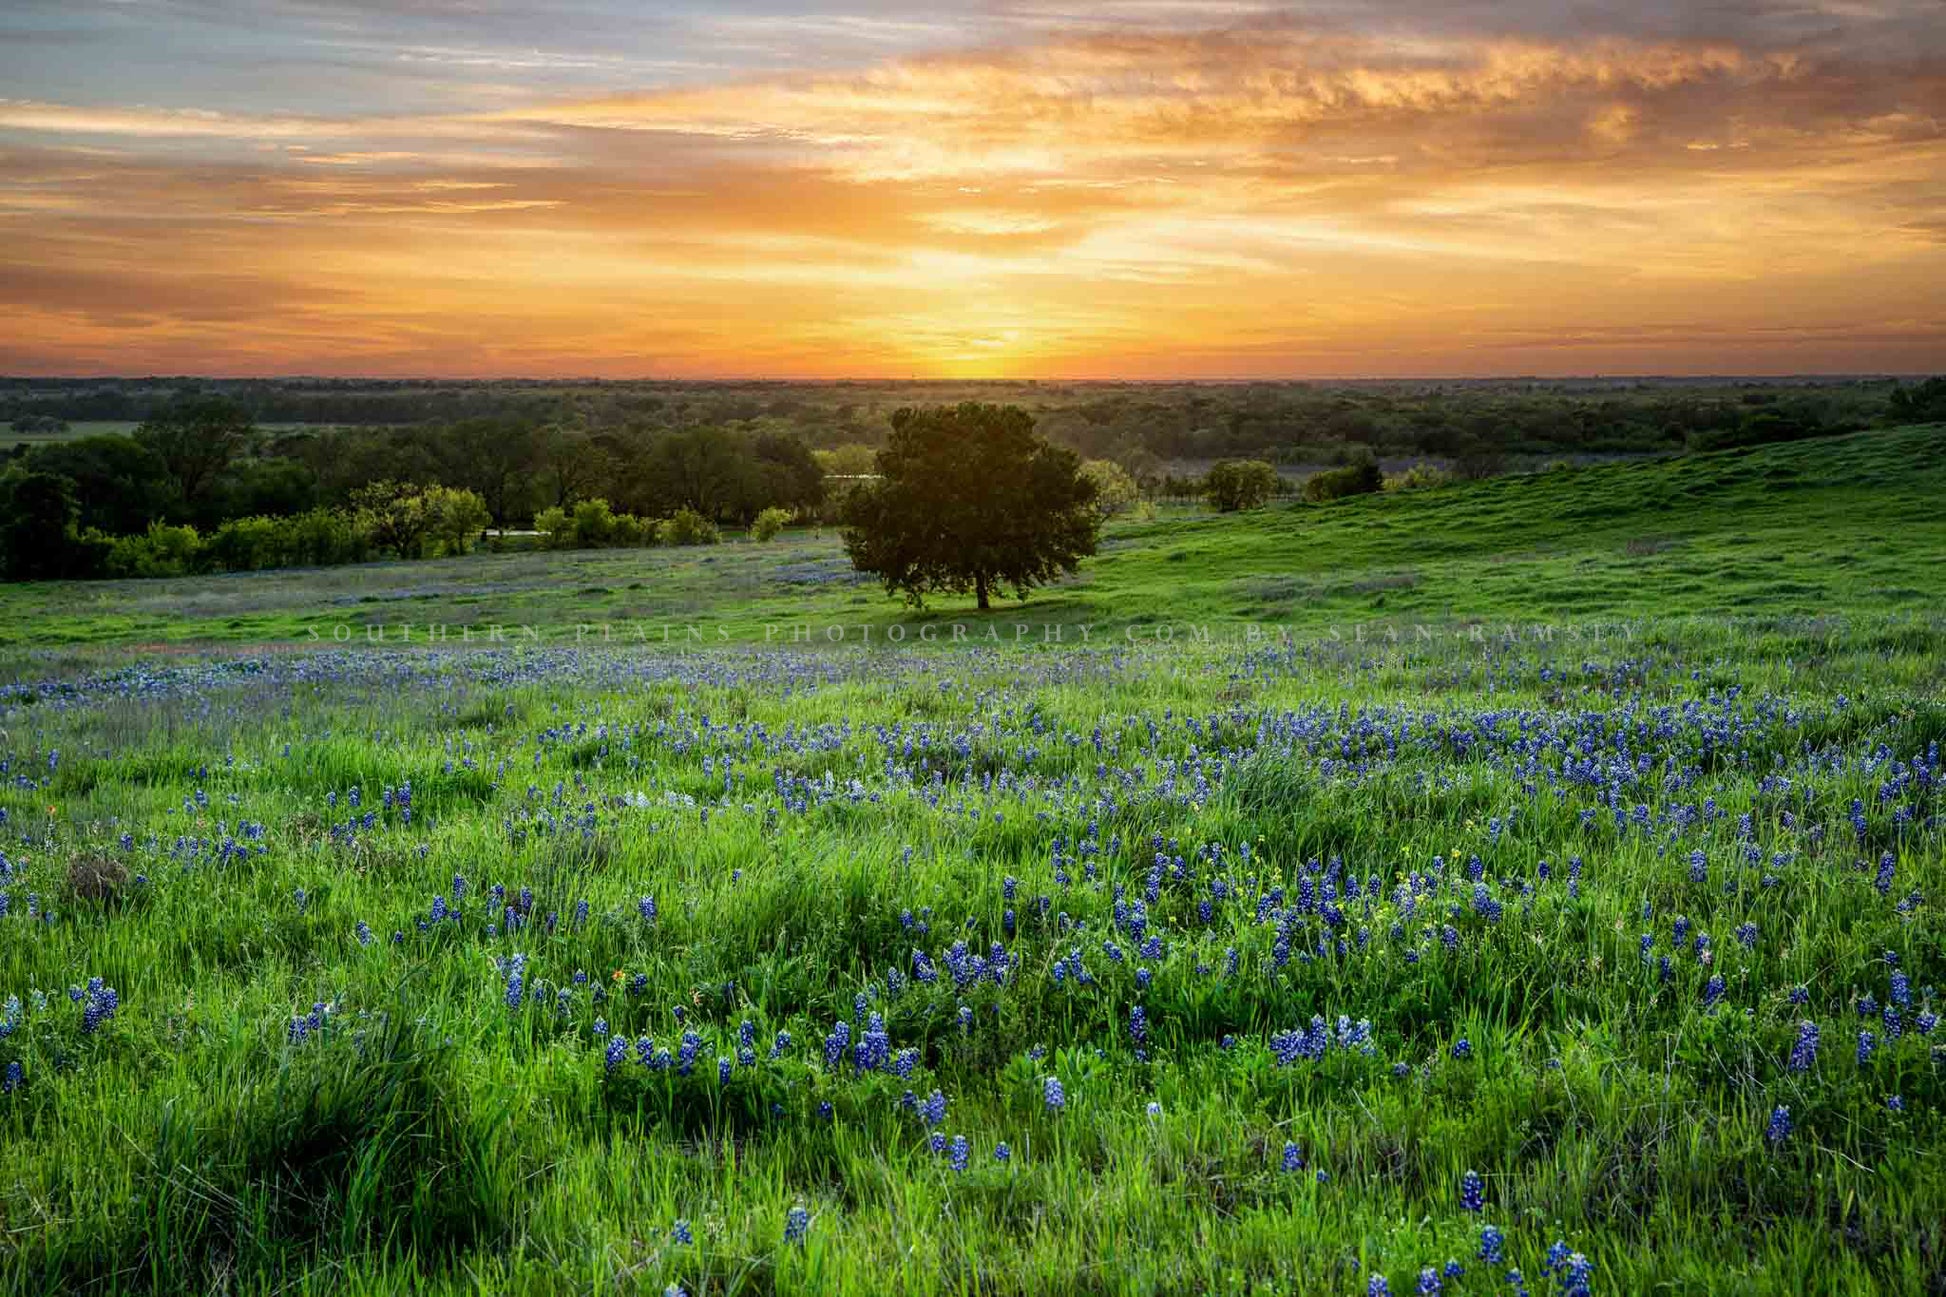 Country photography print of a lone tree in a field of Texas bluebonnets at sunset on a spring evening in Texas by Sean Ramsey of Southern Plains Photography.